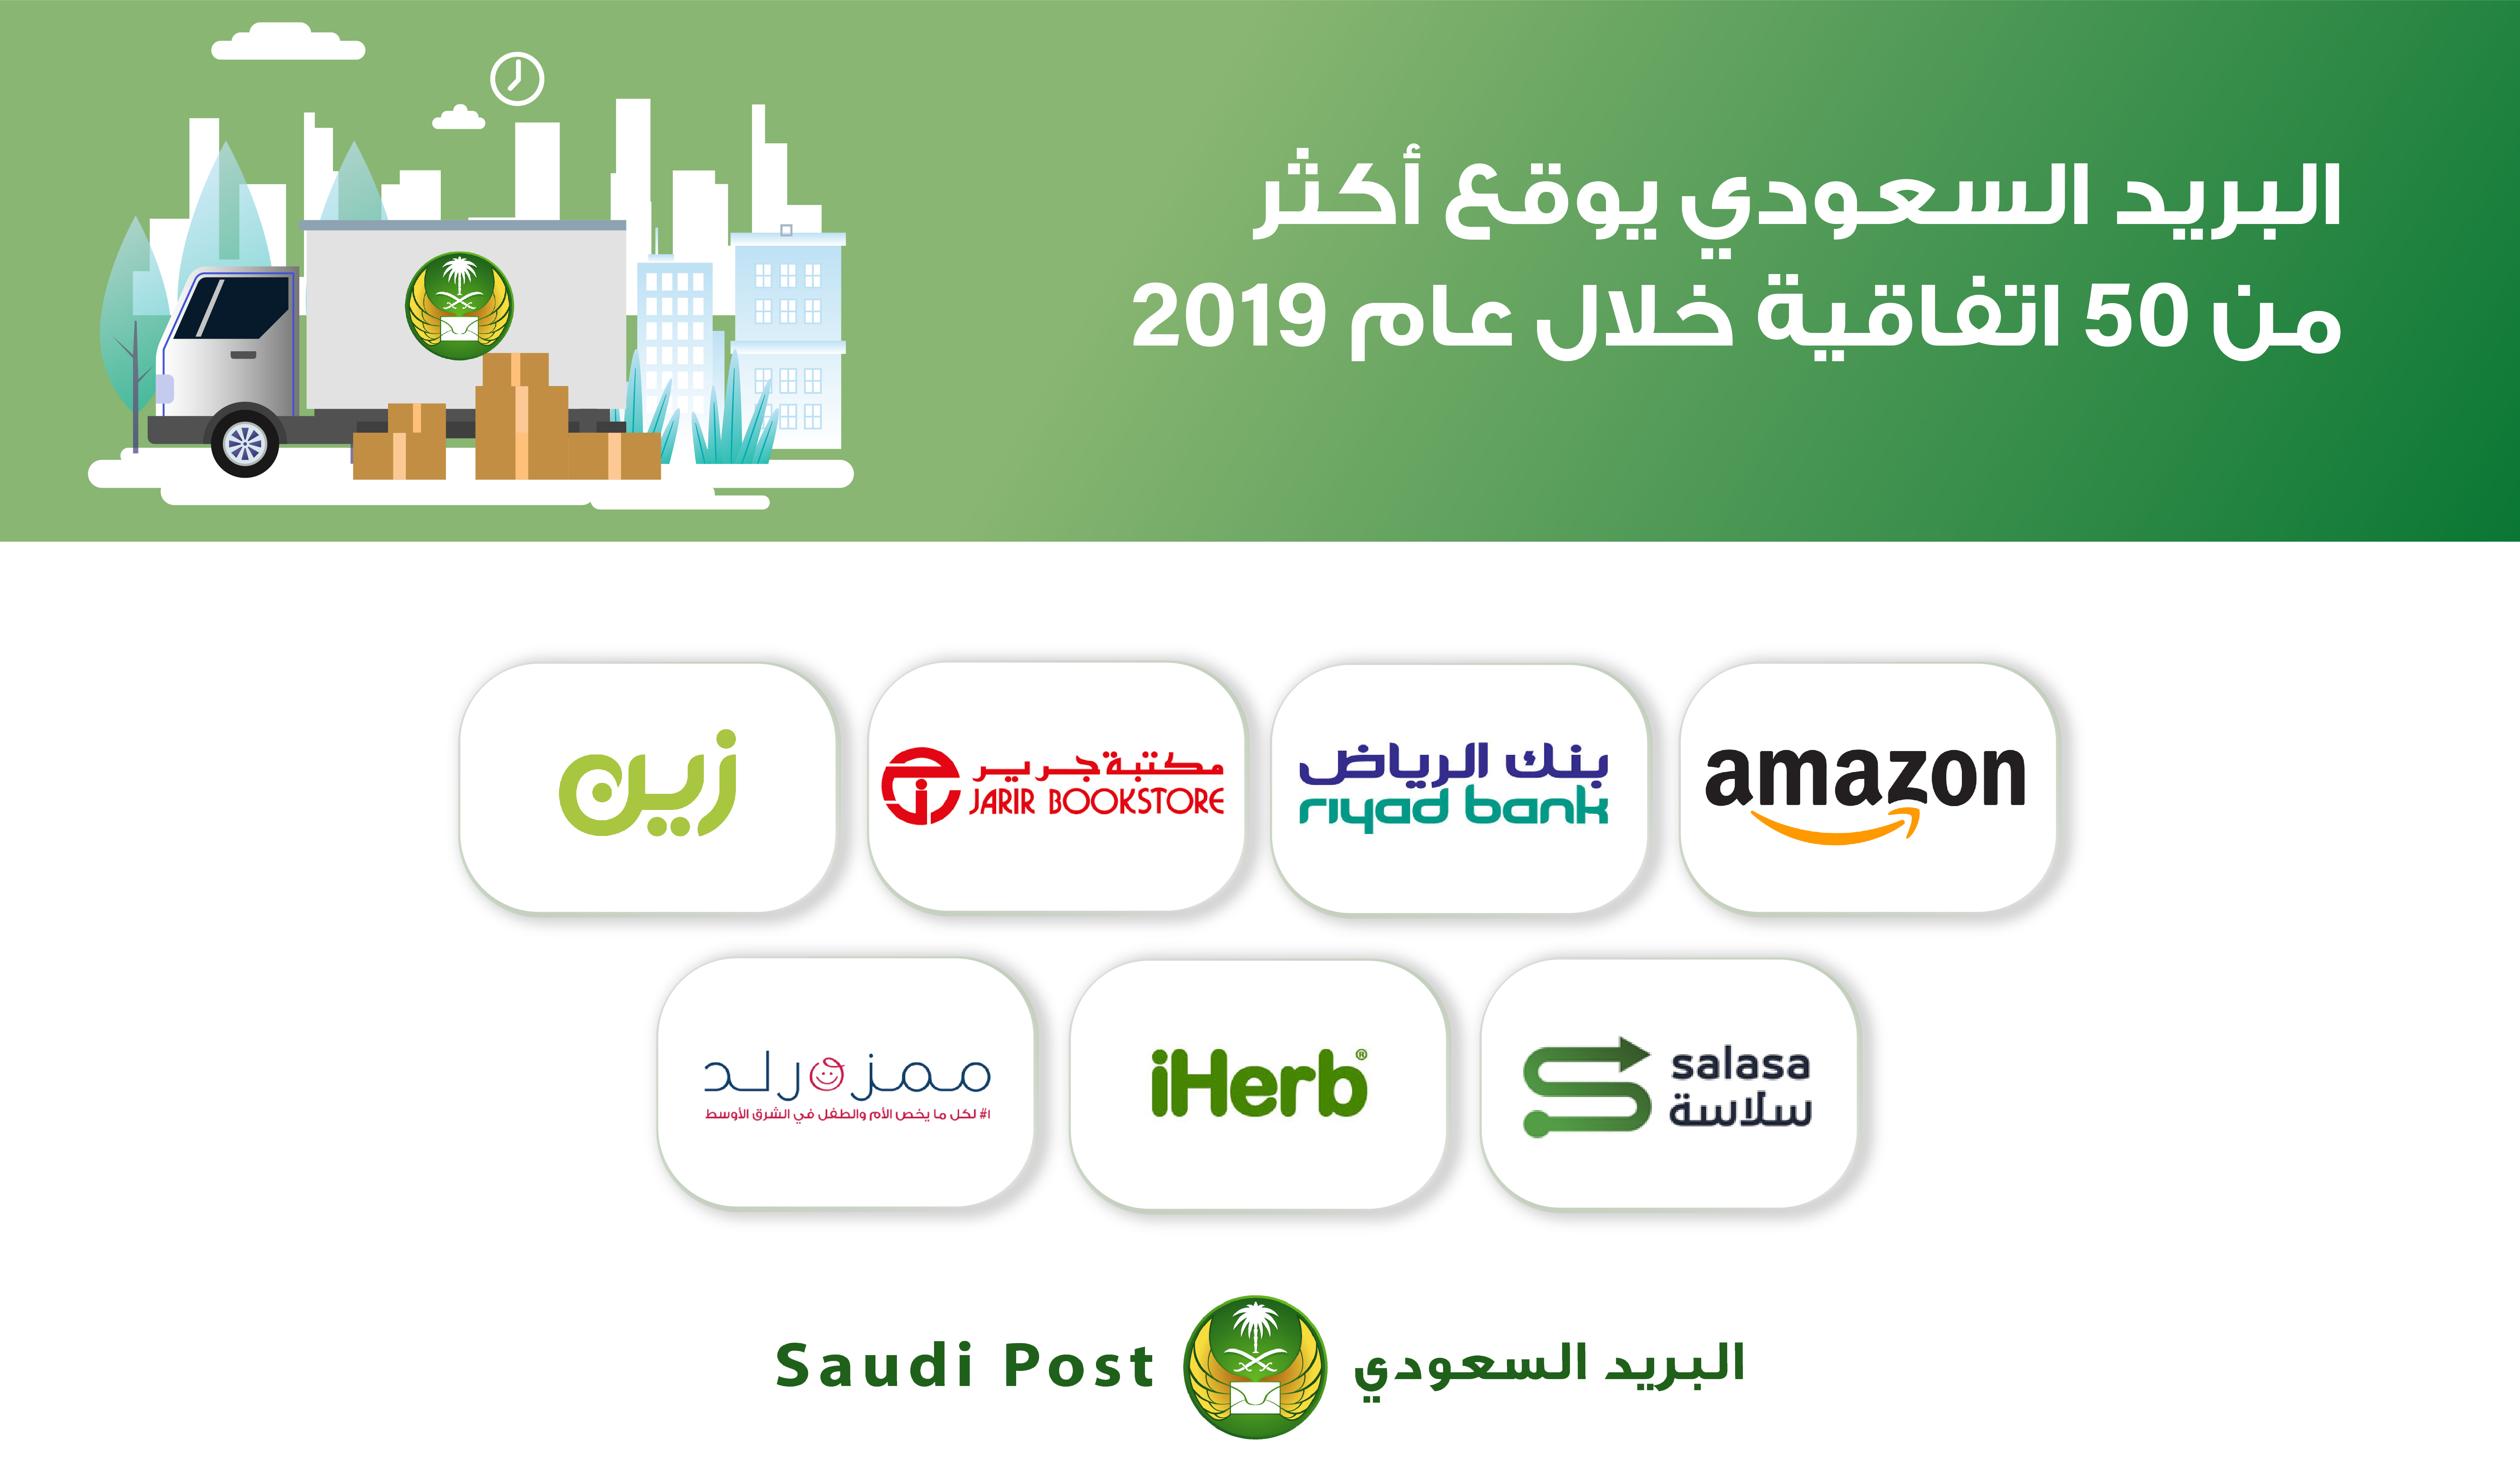 Saudi Post signed more than 50 Agreements in the year 2019